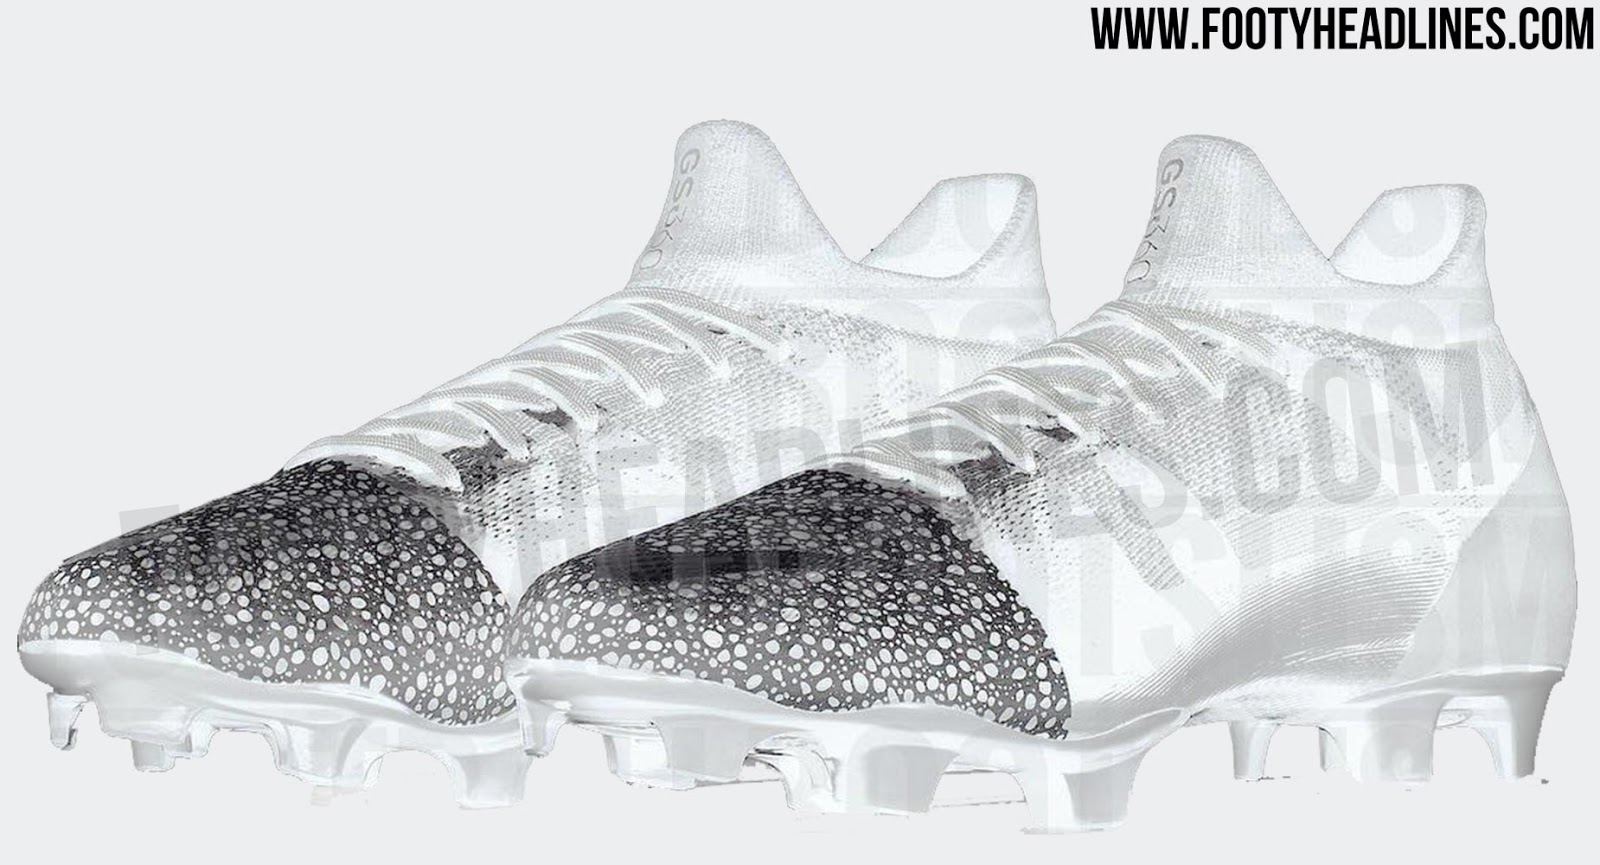 Exclusive: Nike to Release Mercurial GS360 iD Boots - Footy Headlines